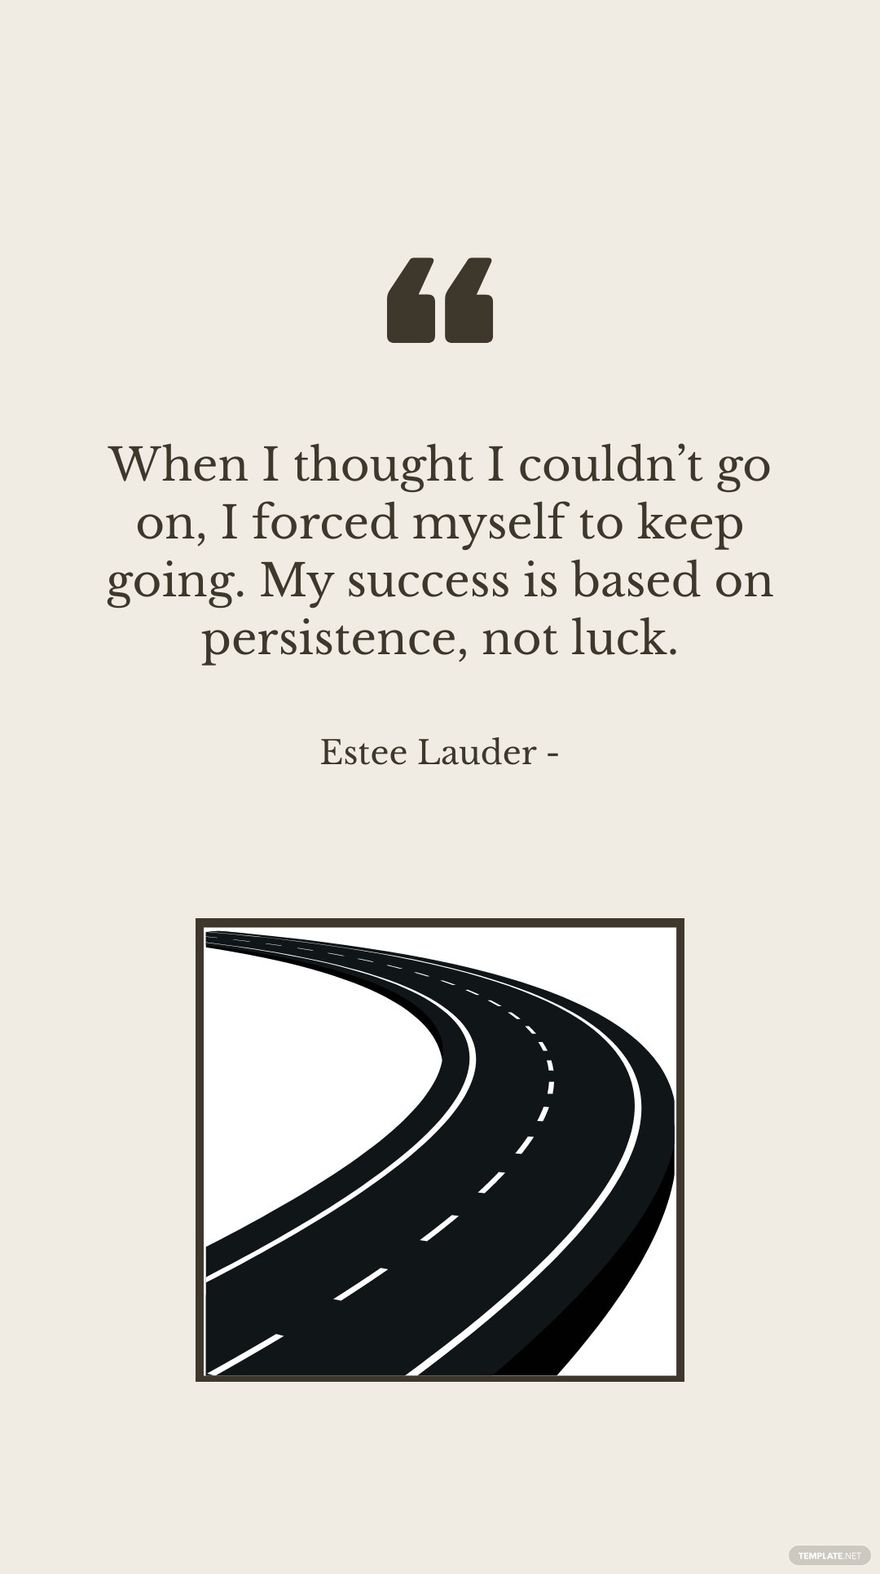 Estee Lauder - When I thought I couldn’t go on, I forced myself to keep going. My success is based on persistence, not luck.